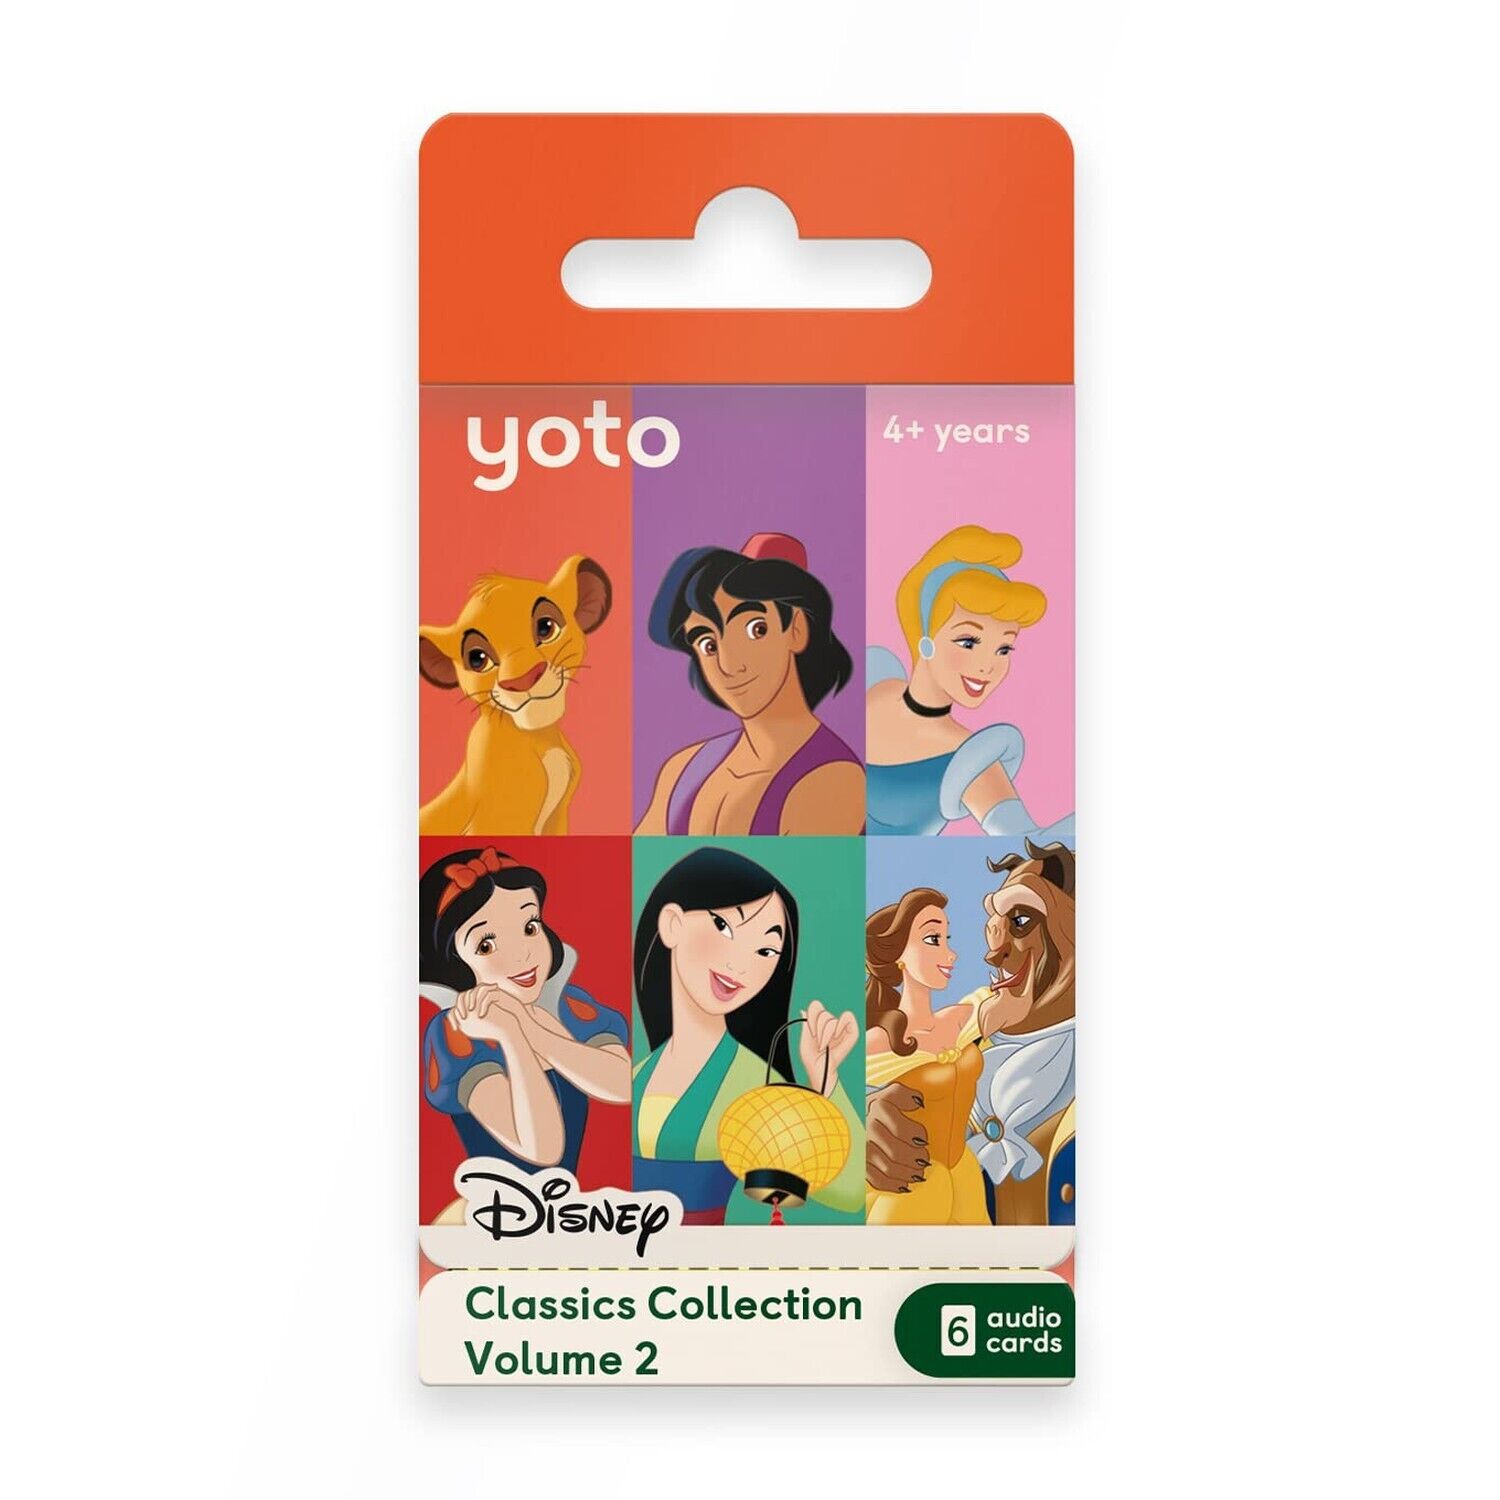 Yoto Disney Classics Collection: Vol. 2 – Kids 6 Audiobook Cards for Use w